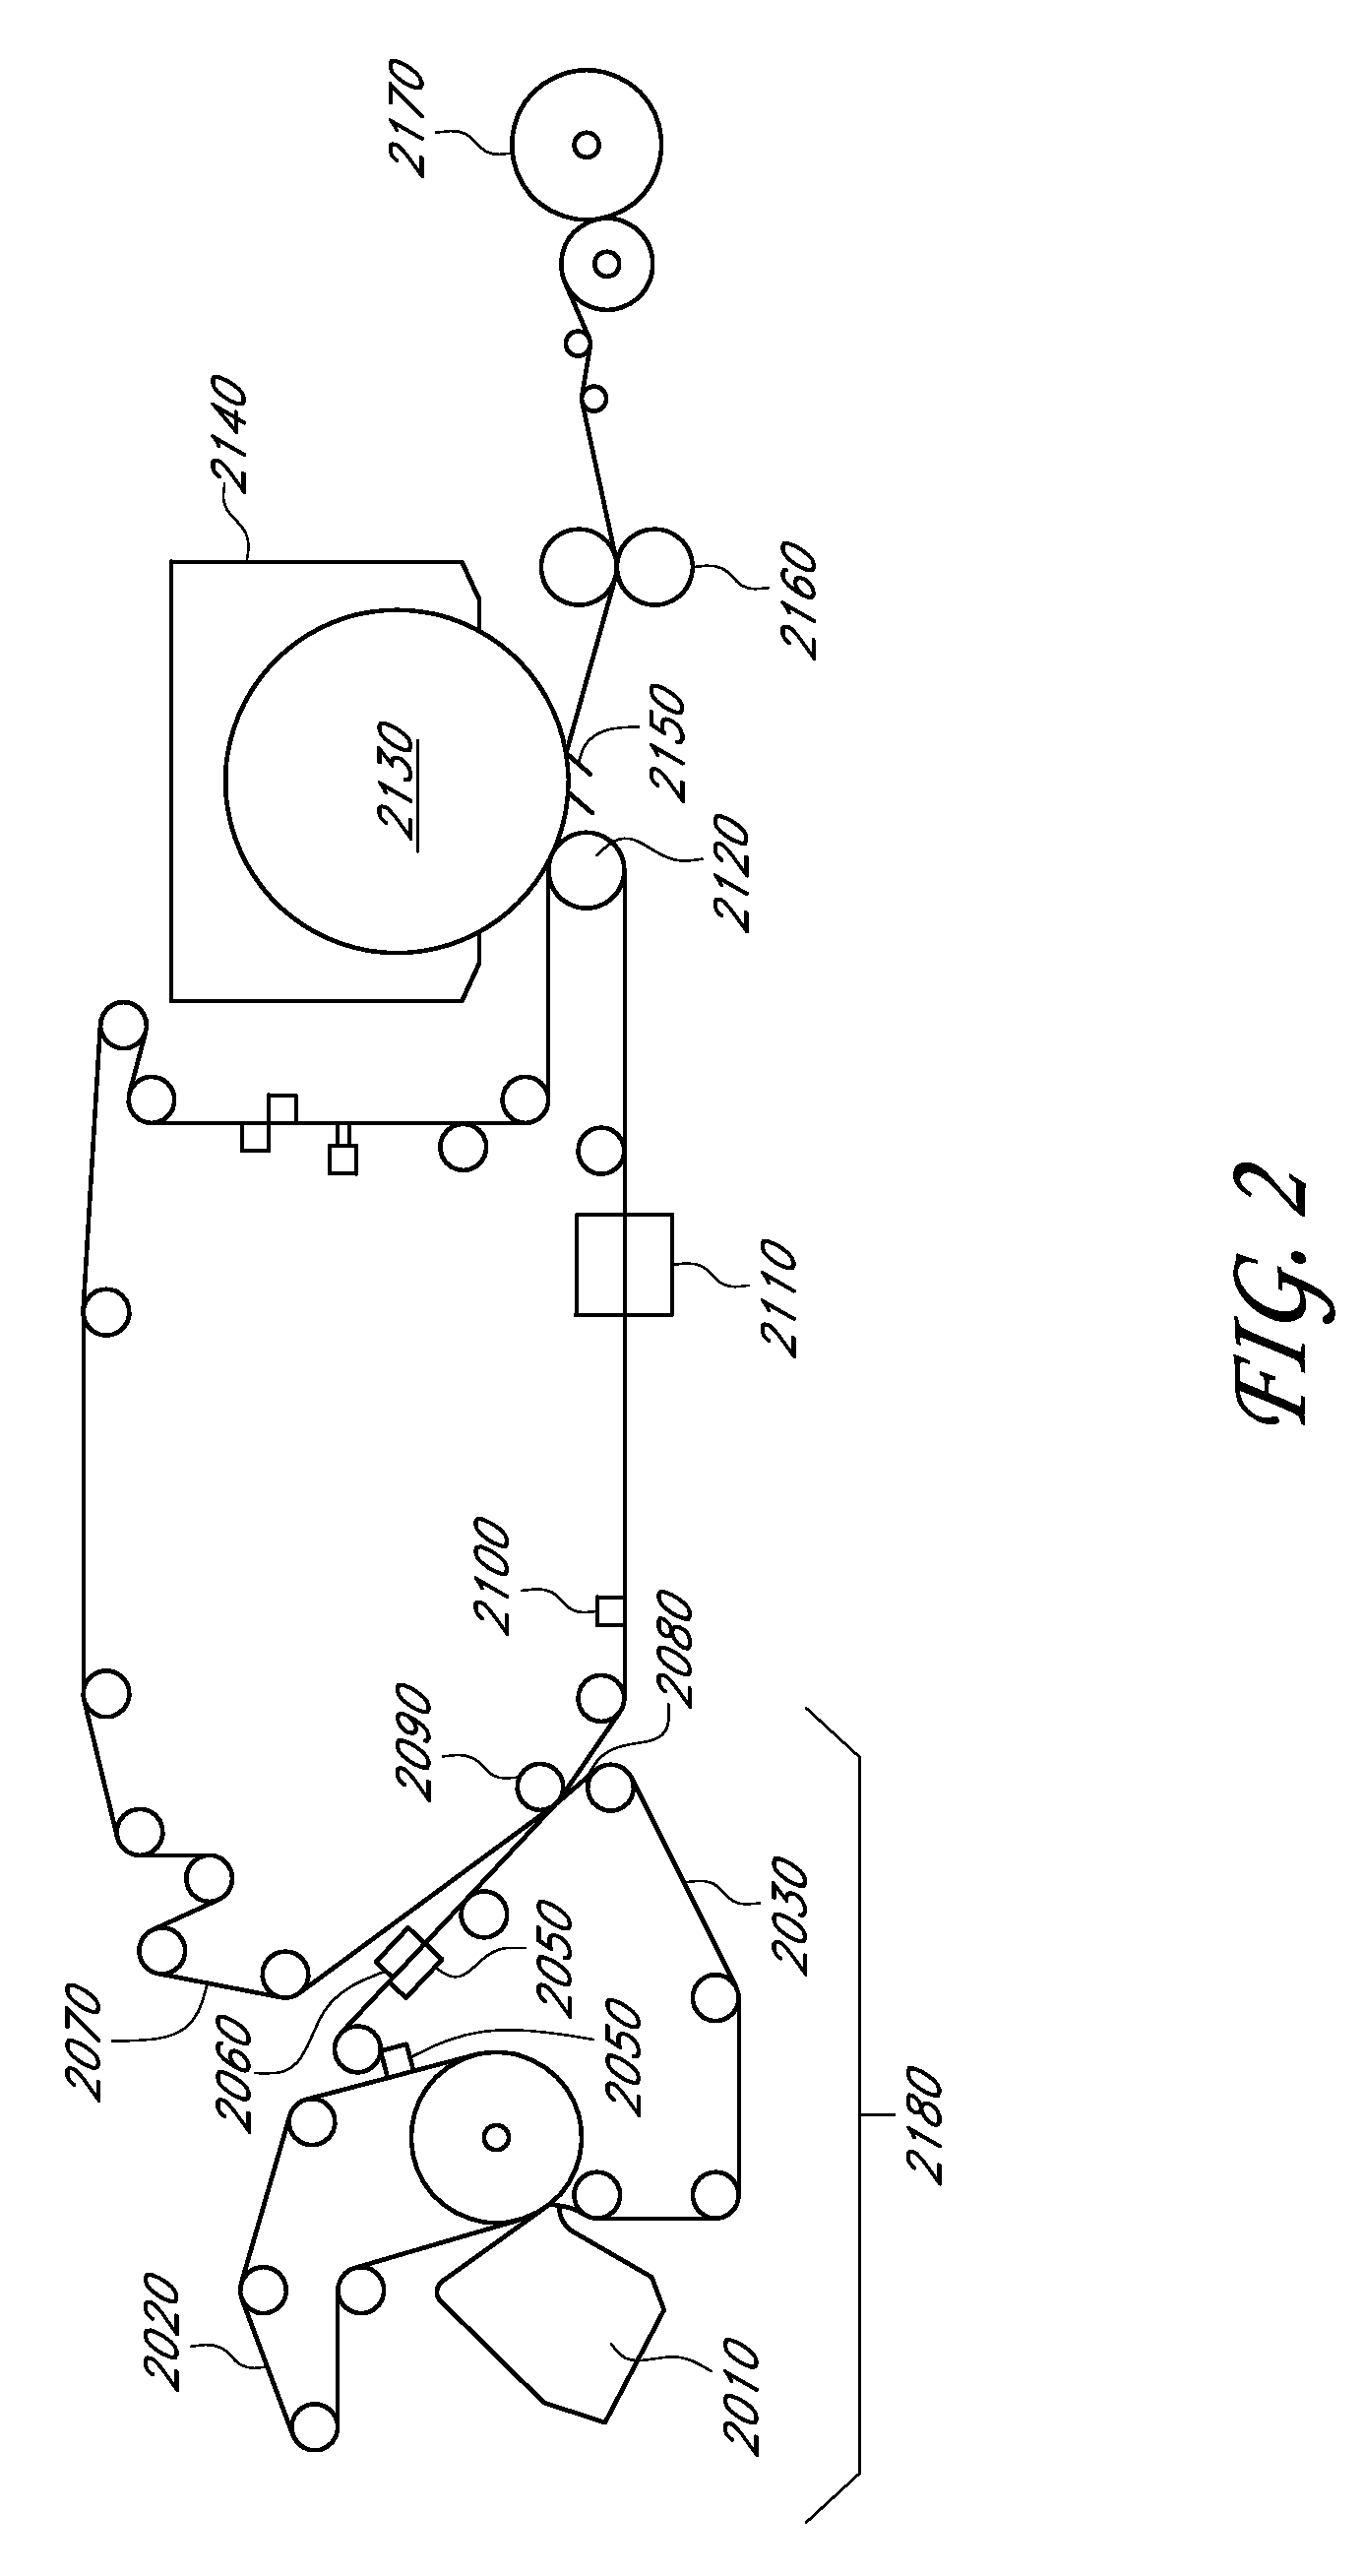 Creping adhesive modifier and methods for producing paper products